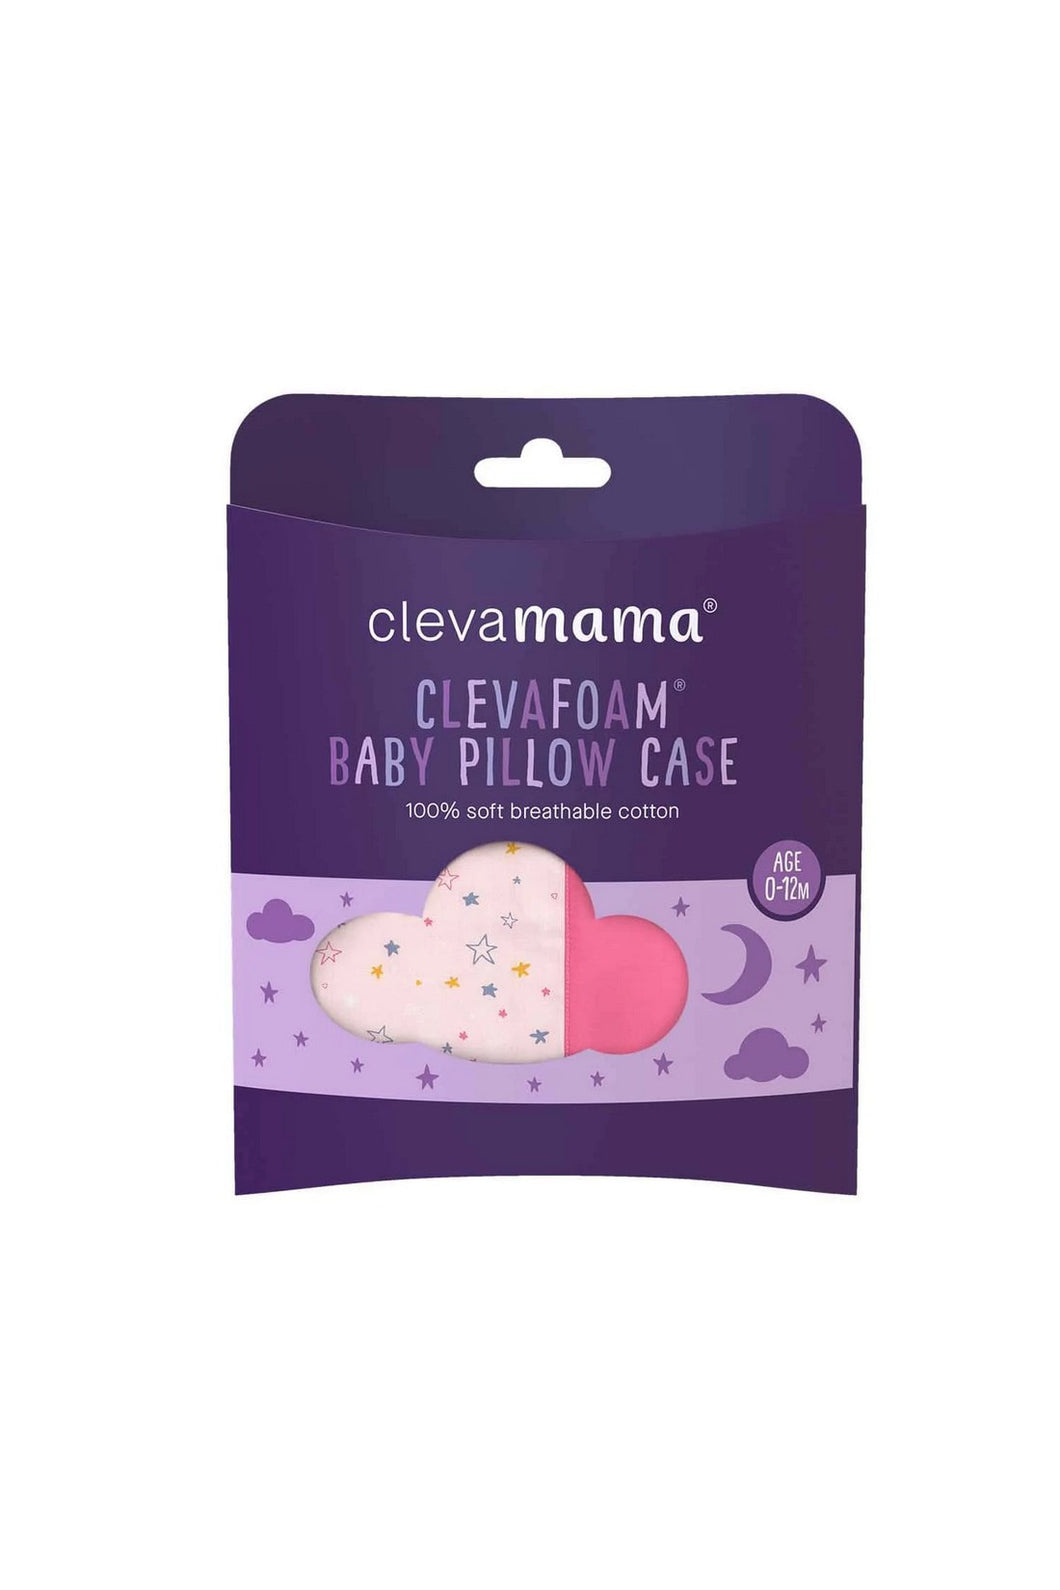 Cleavamama Baby Pillow Case - 100% Natural Cotton 4